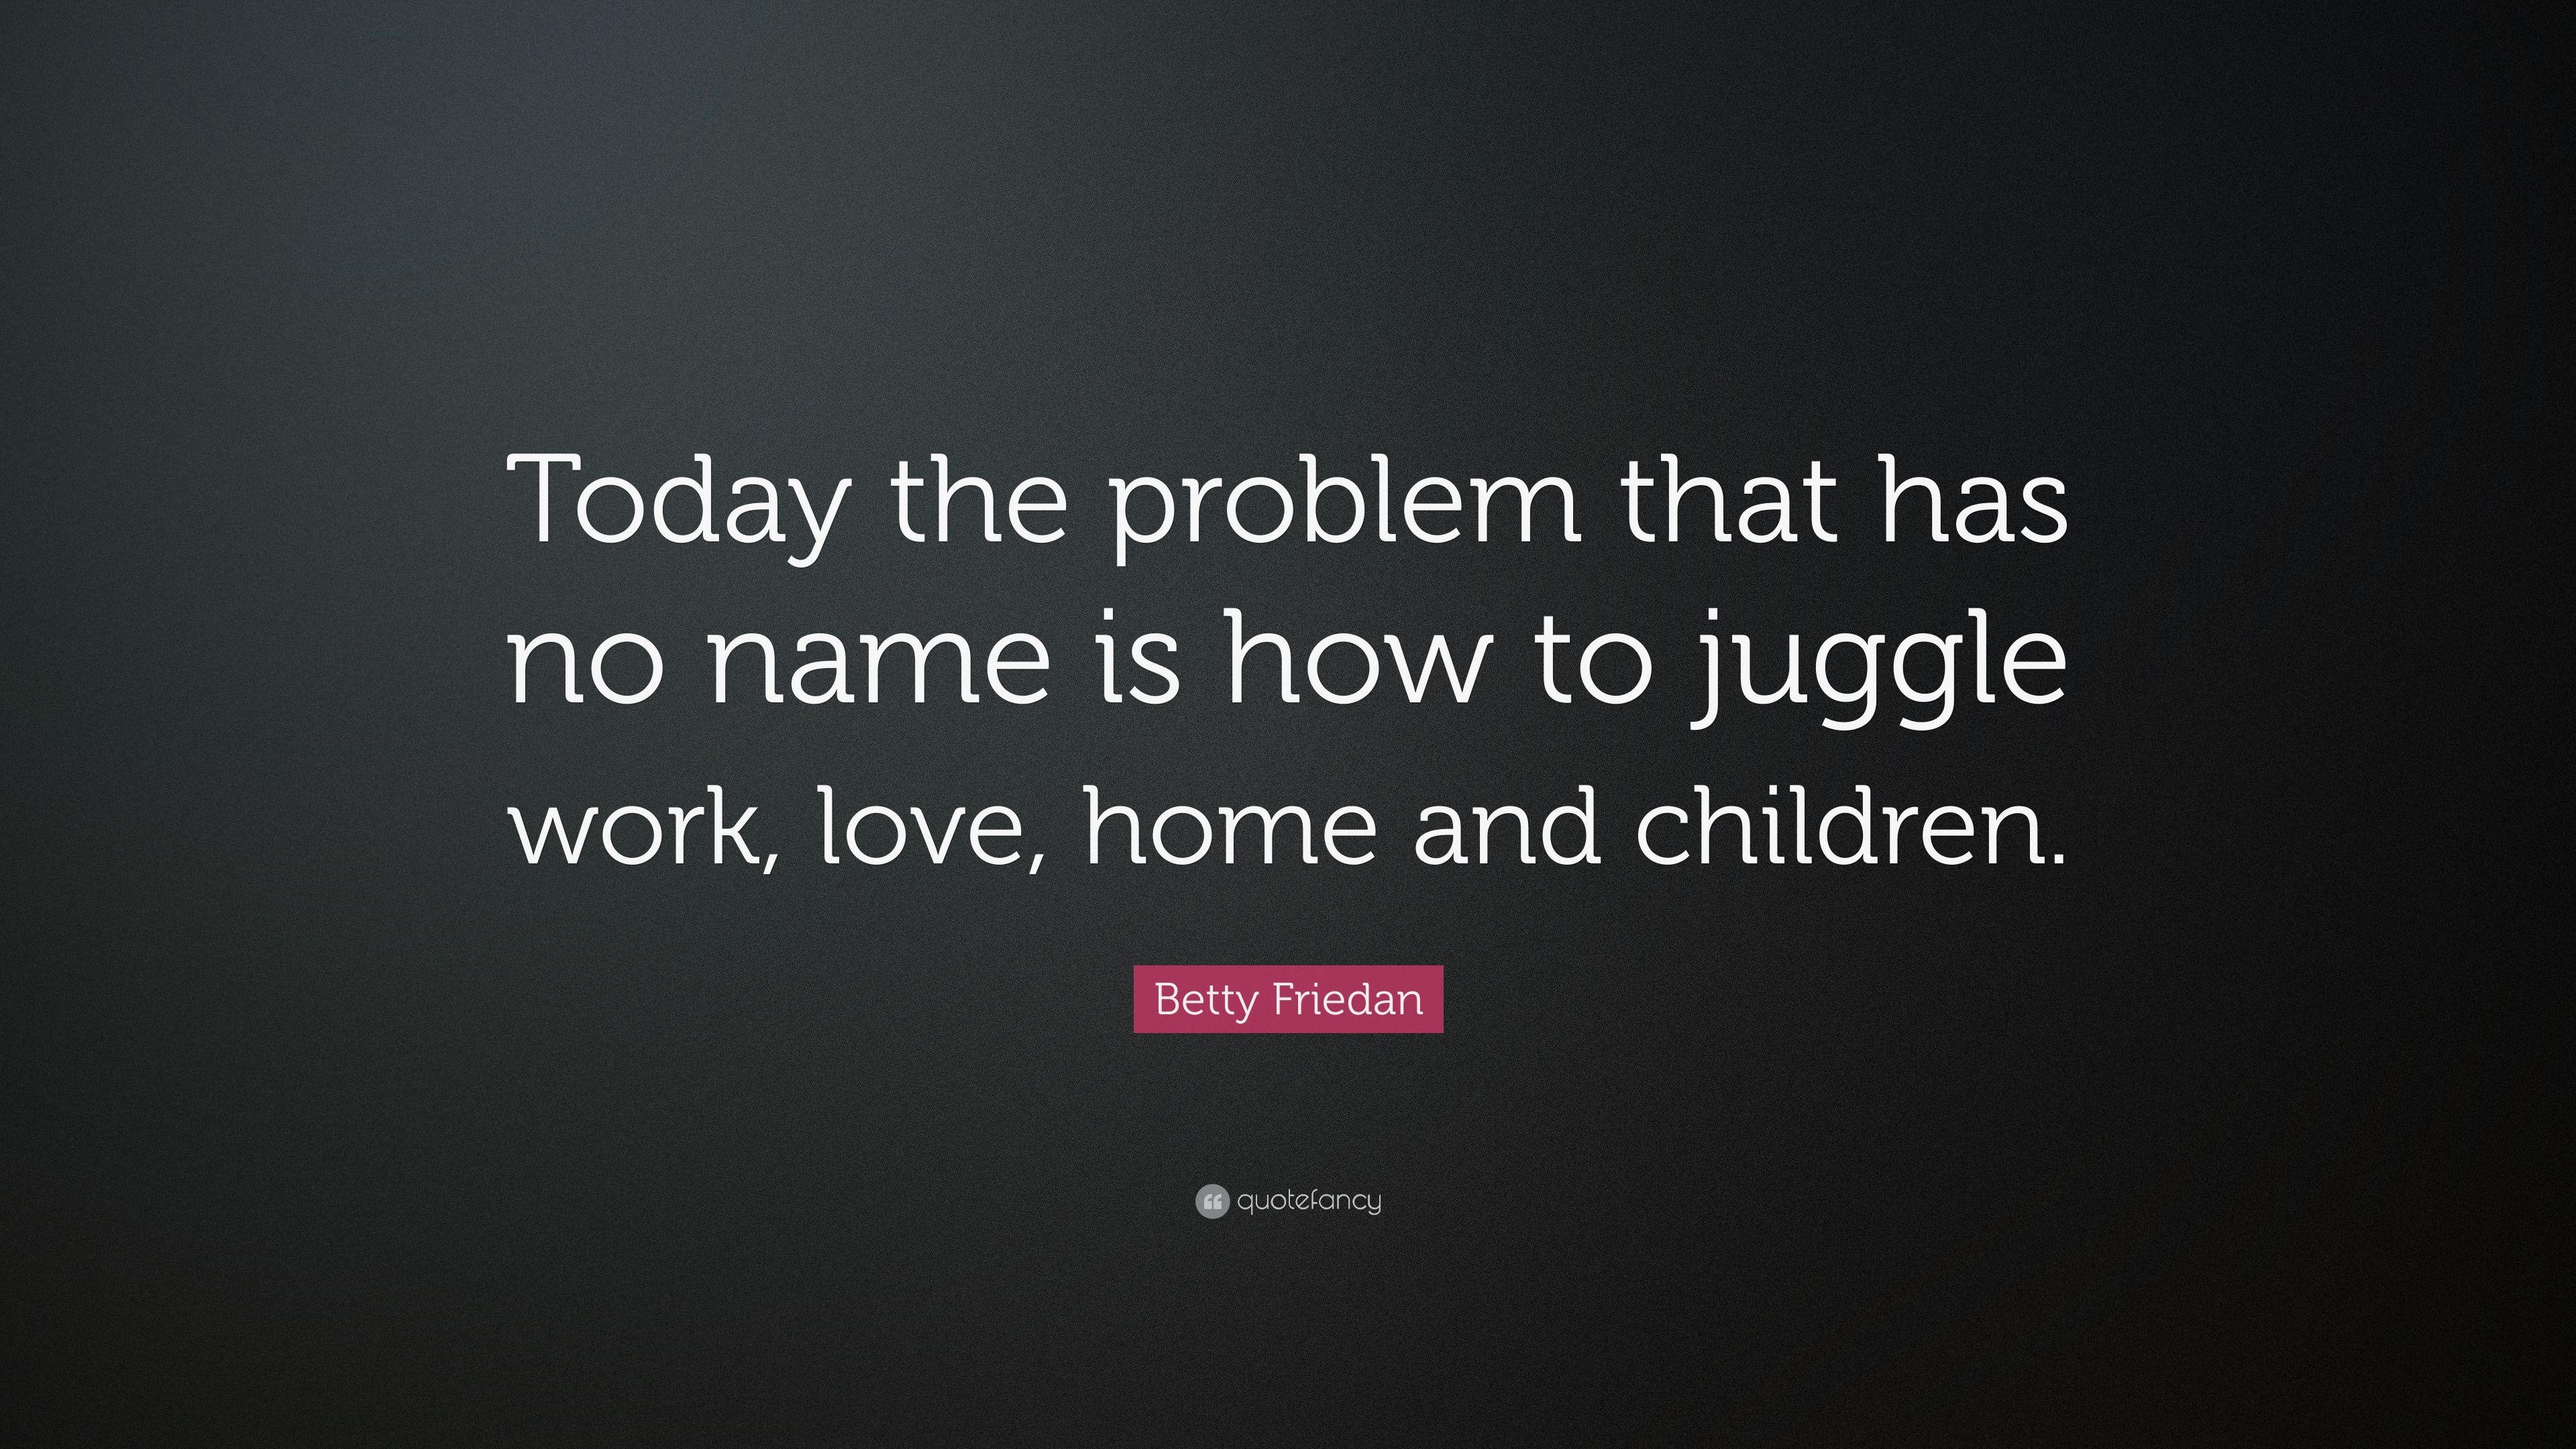 Betty Friedan Quote: “Today the problem that has no name is how to